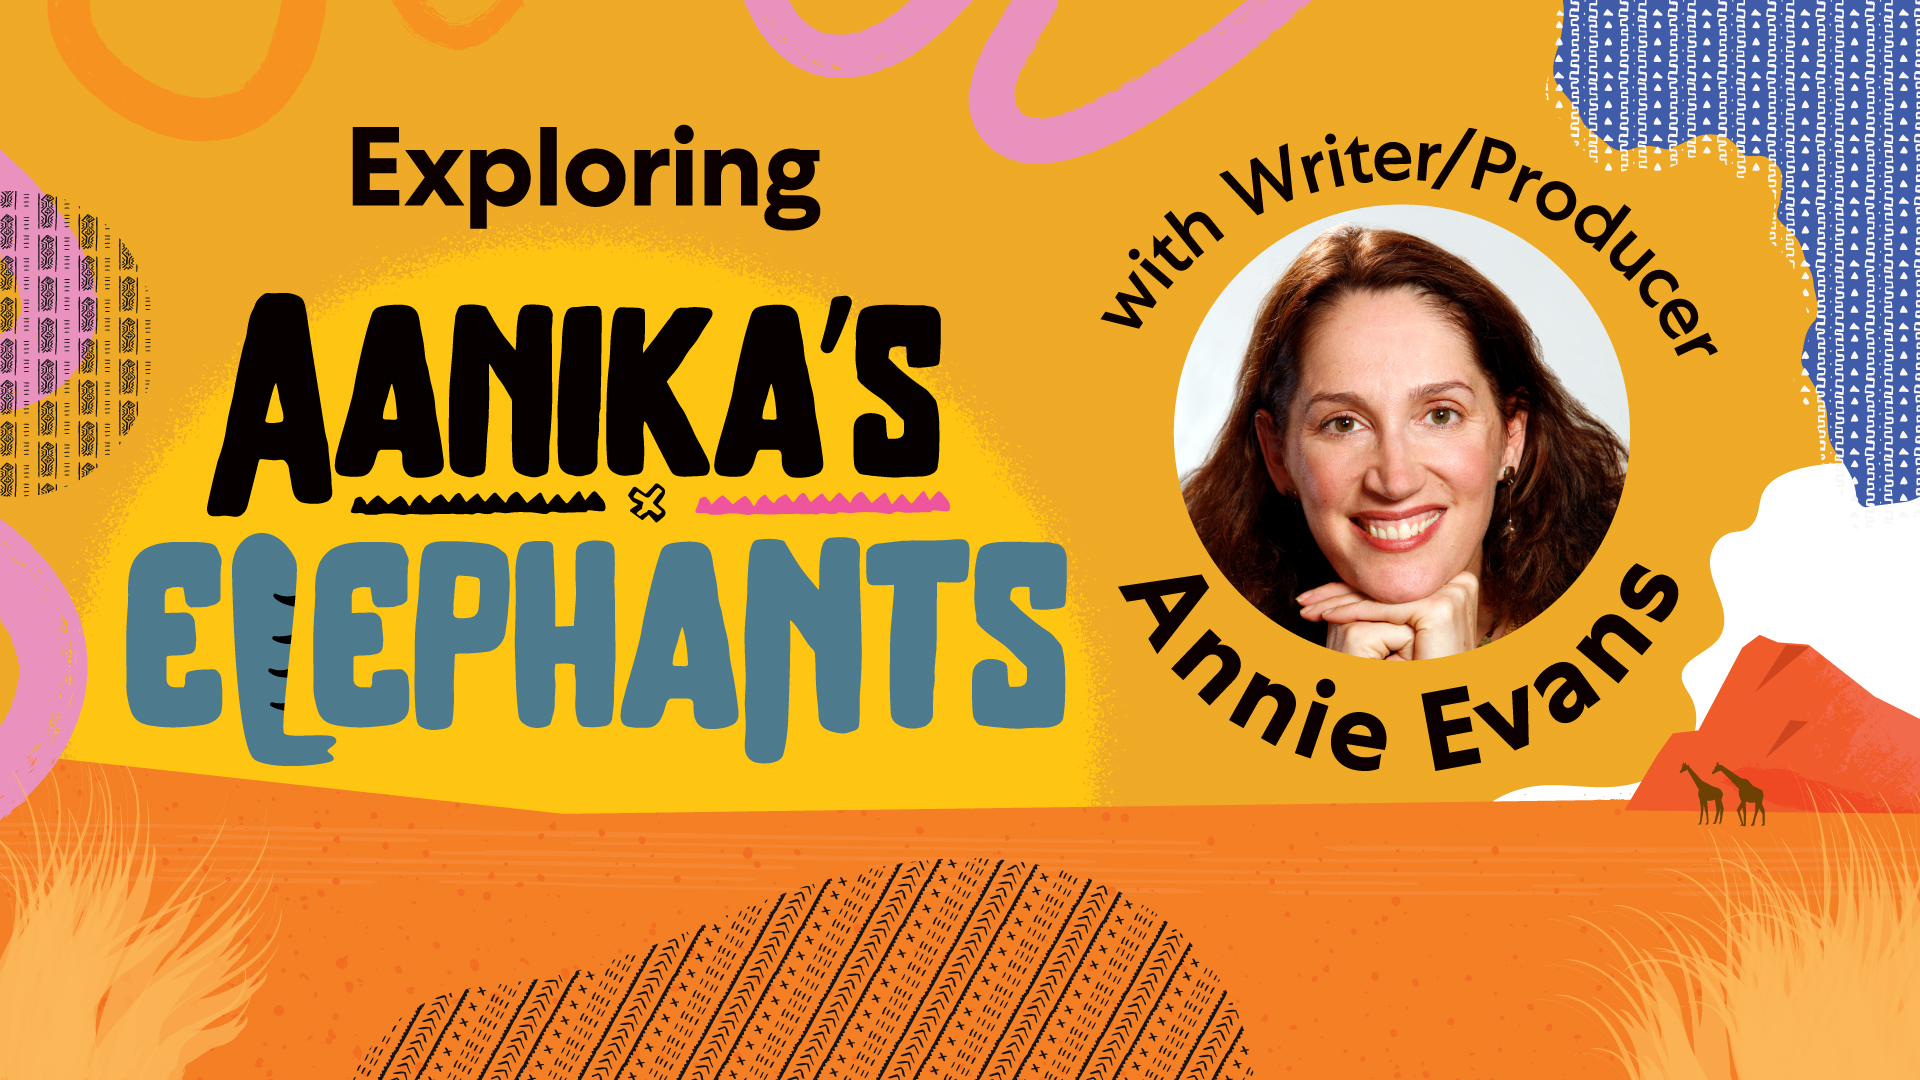 Header image with look and feel of Aanika's Elephants with a picture of Annie Evans